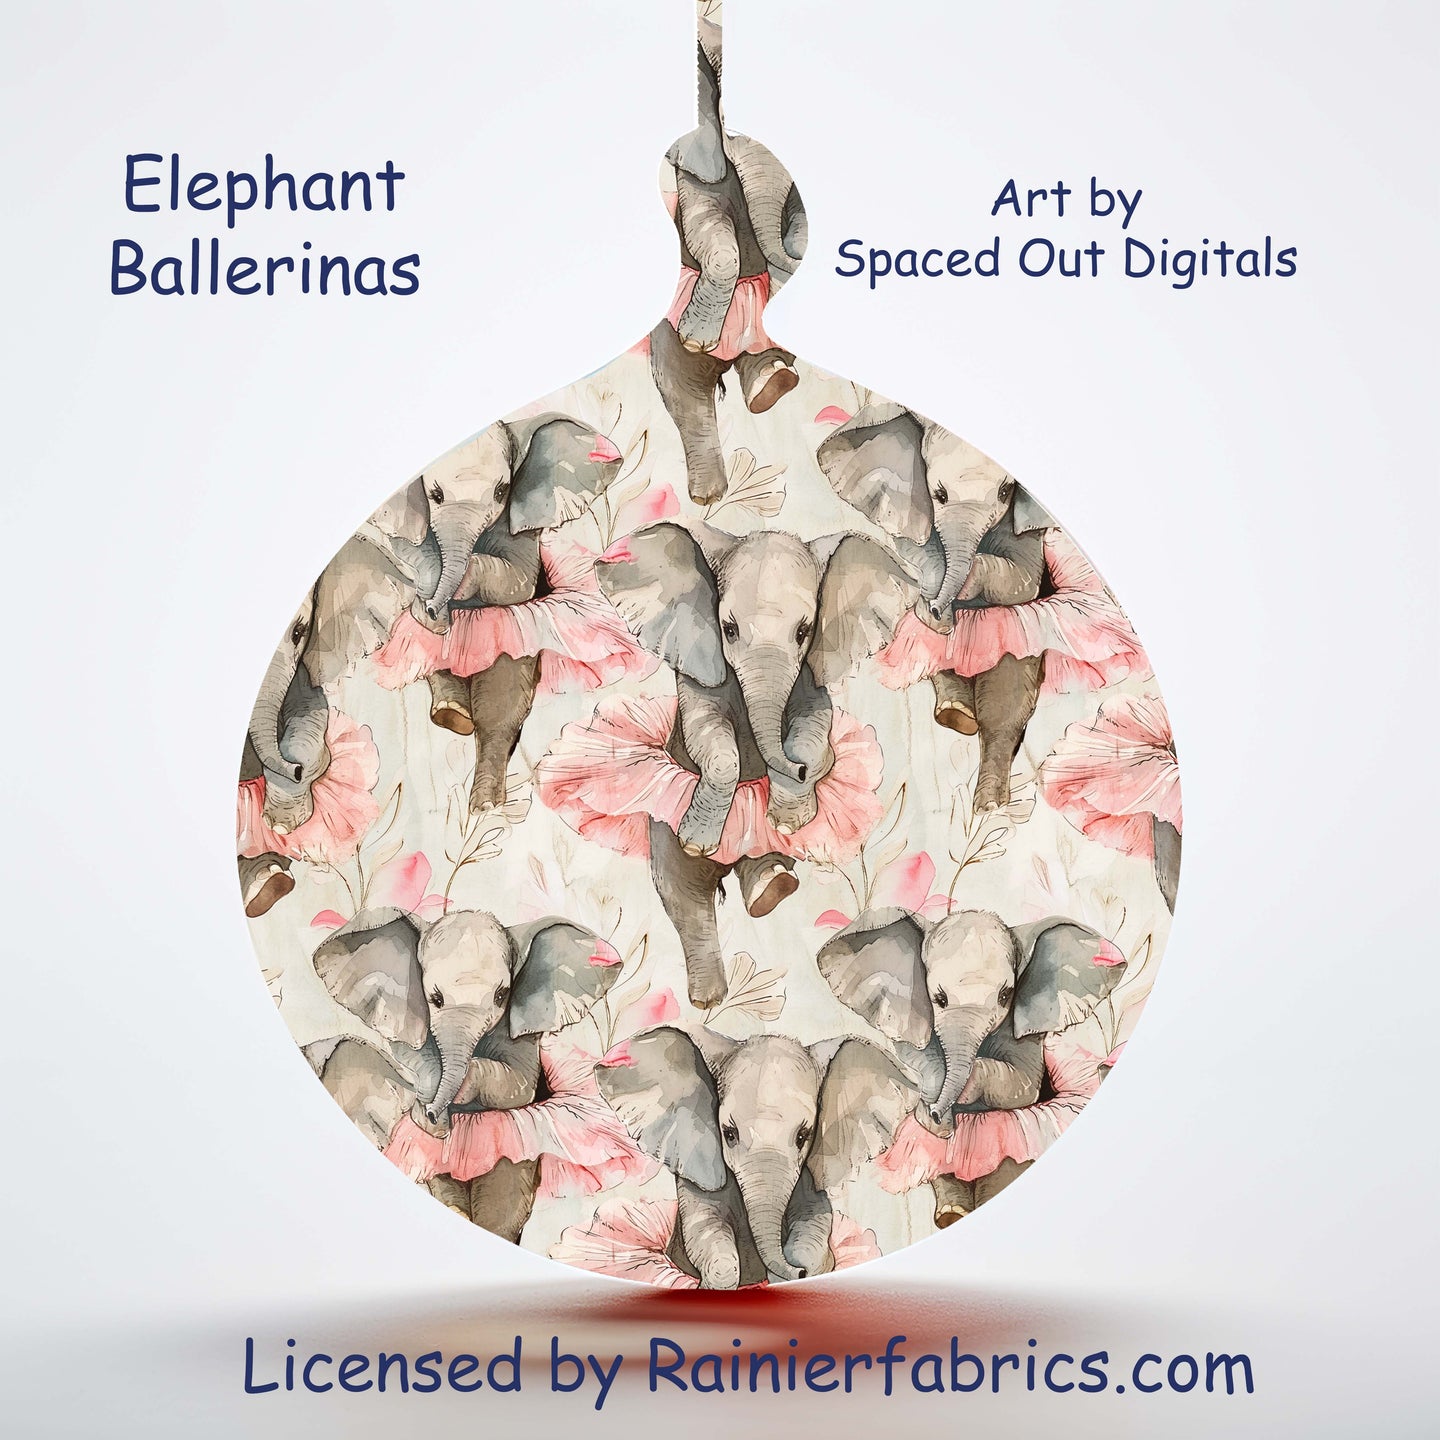 Elephant Ballerinas by Spaced Out Digitals